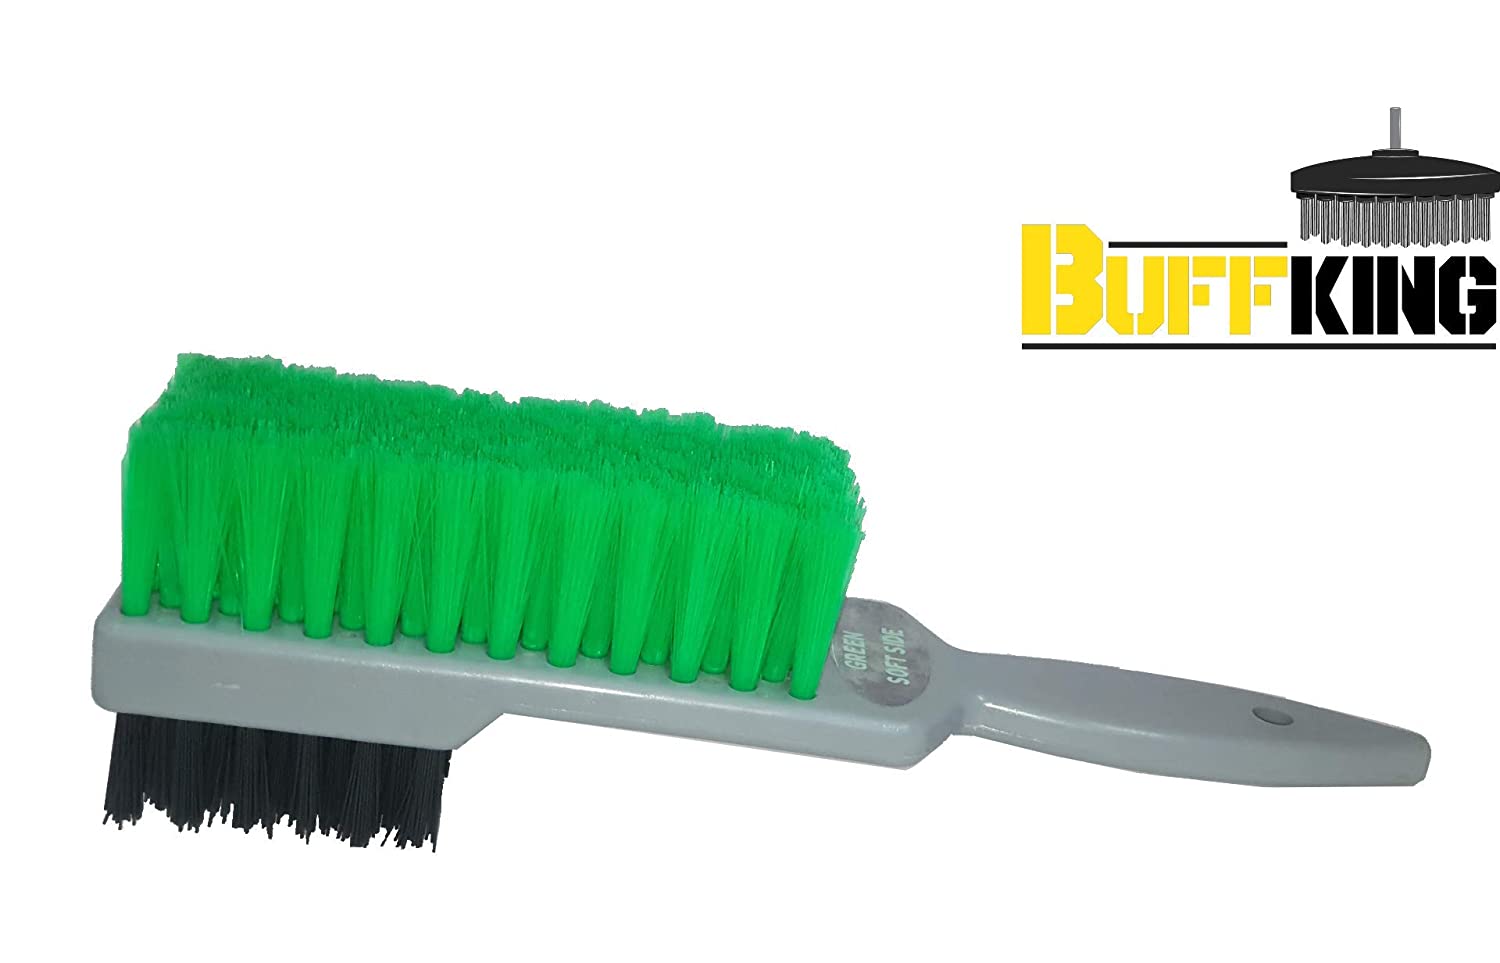 BUFFKING Cloth/General Cleaning Wooden Brush - 2 Pcs : Soft & Hard